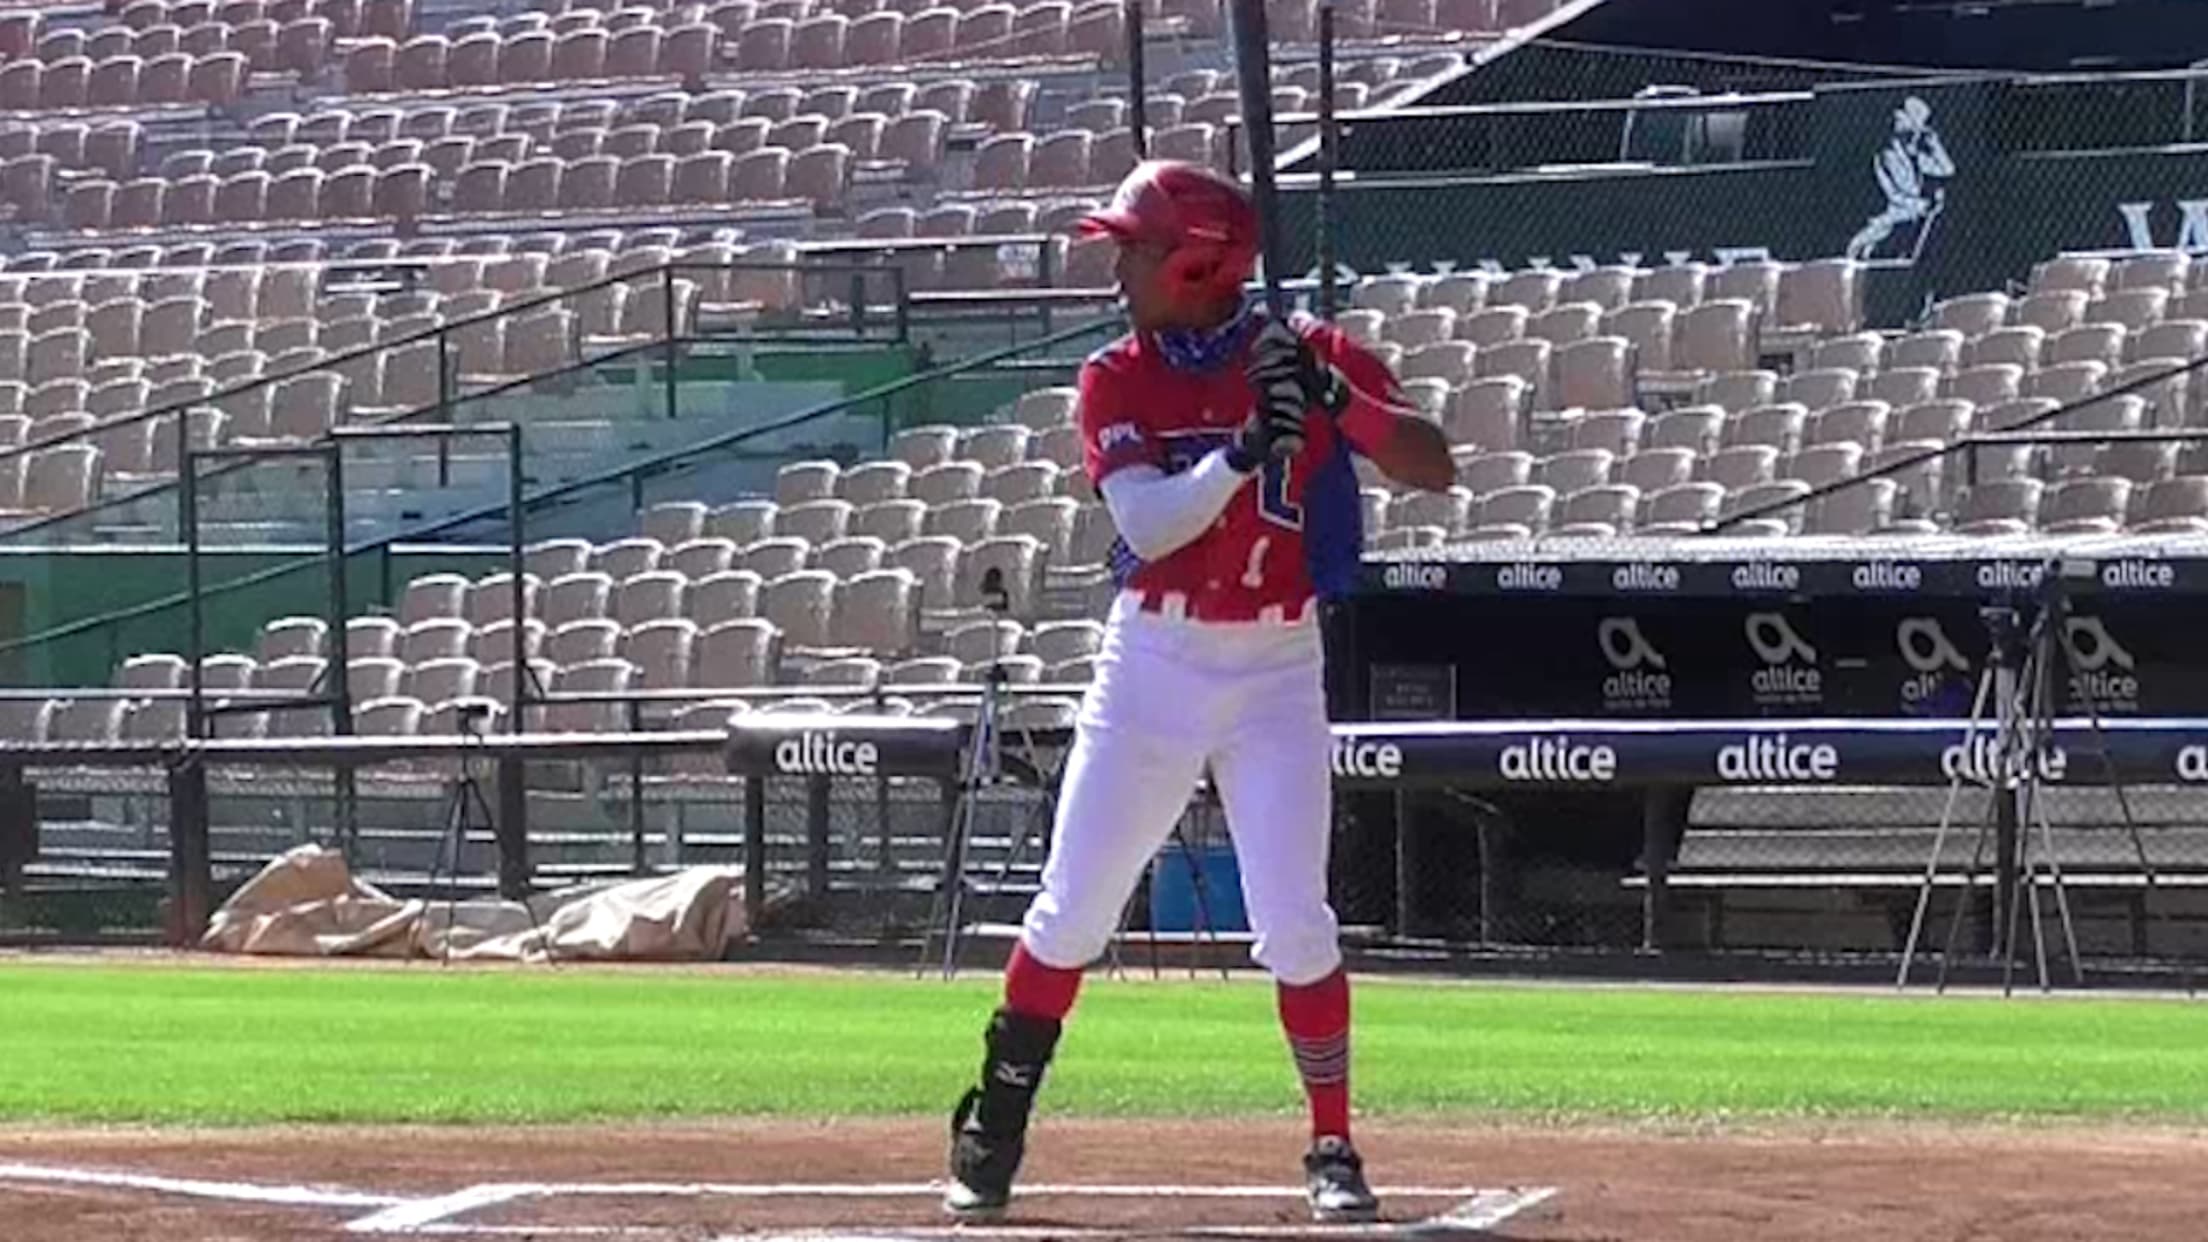 Top Int'l Prospects: Luis, OF